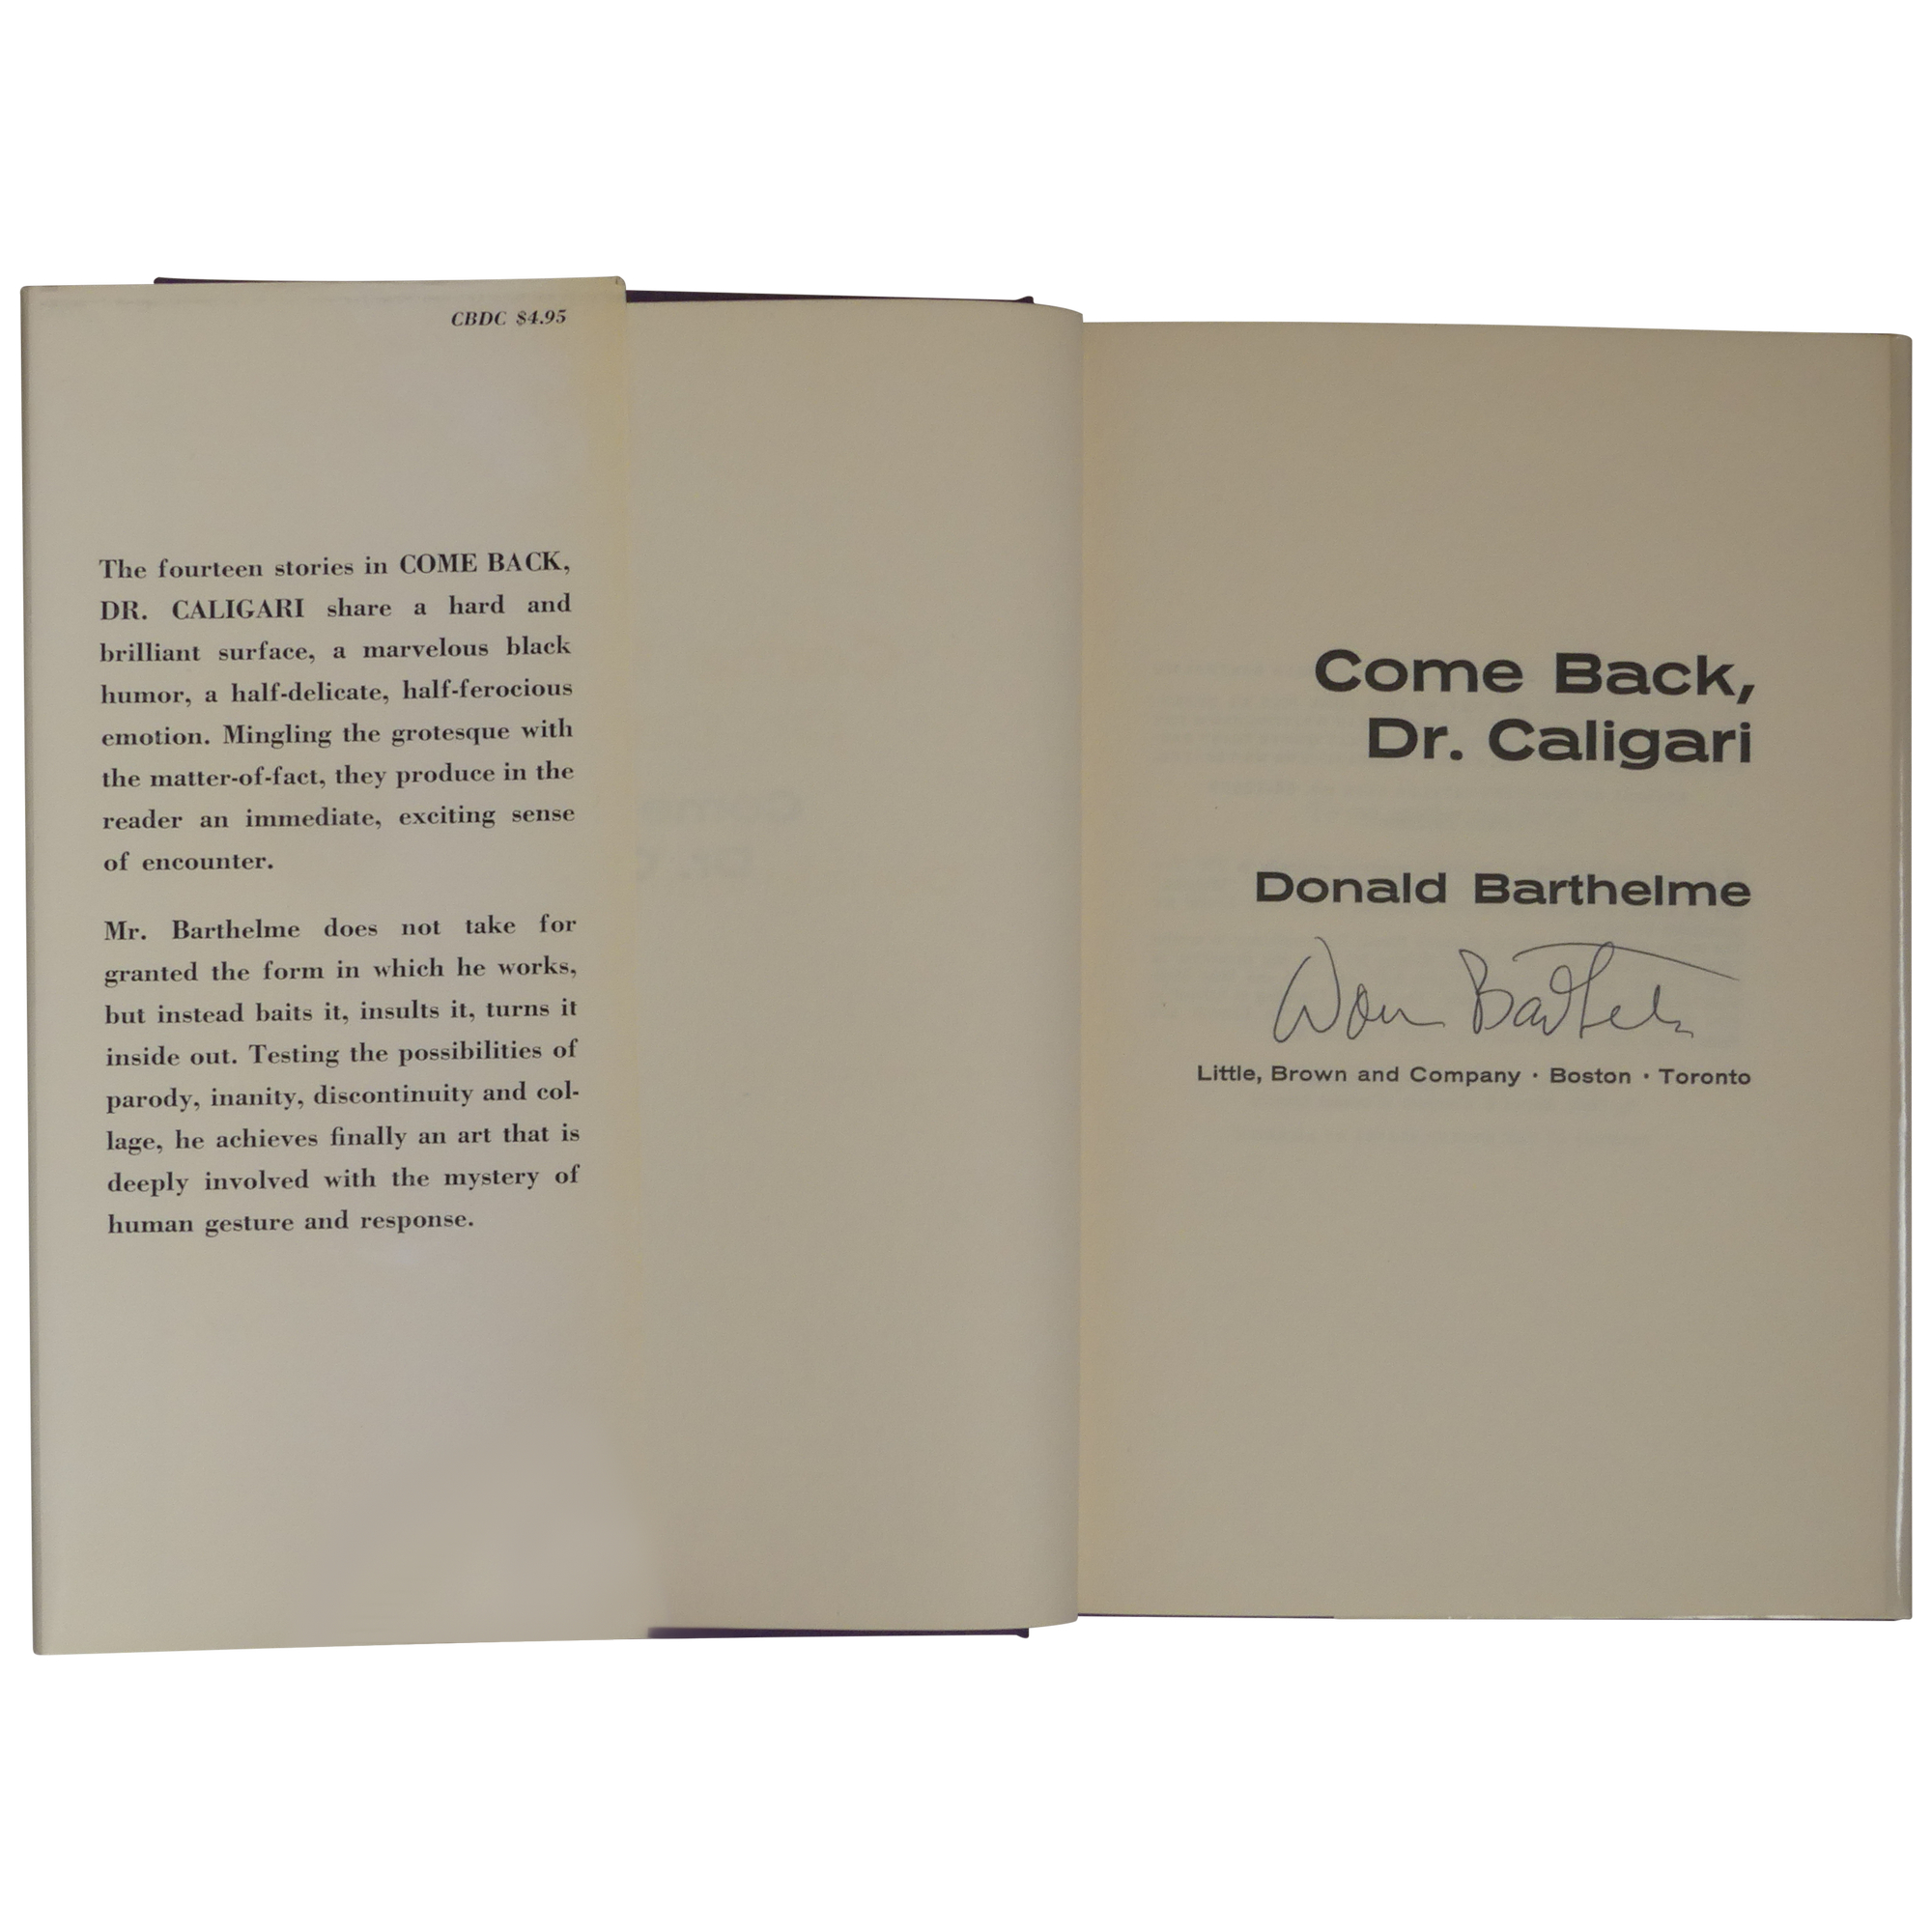 Come Back, Dr. Caligari by Donald Barthelme